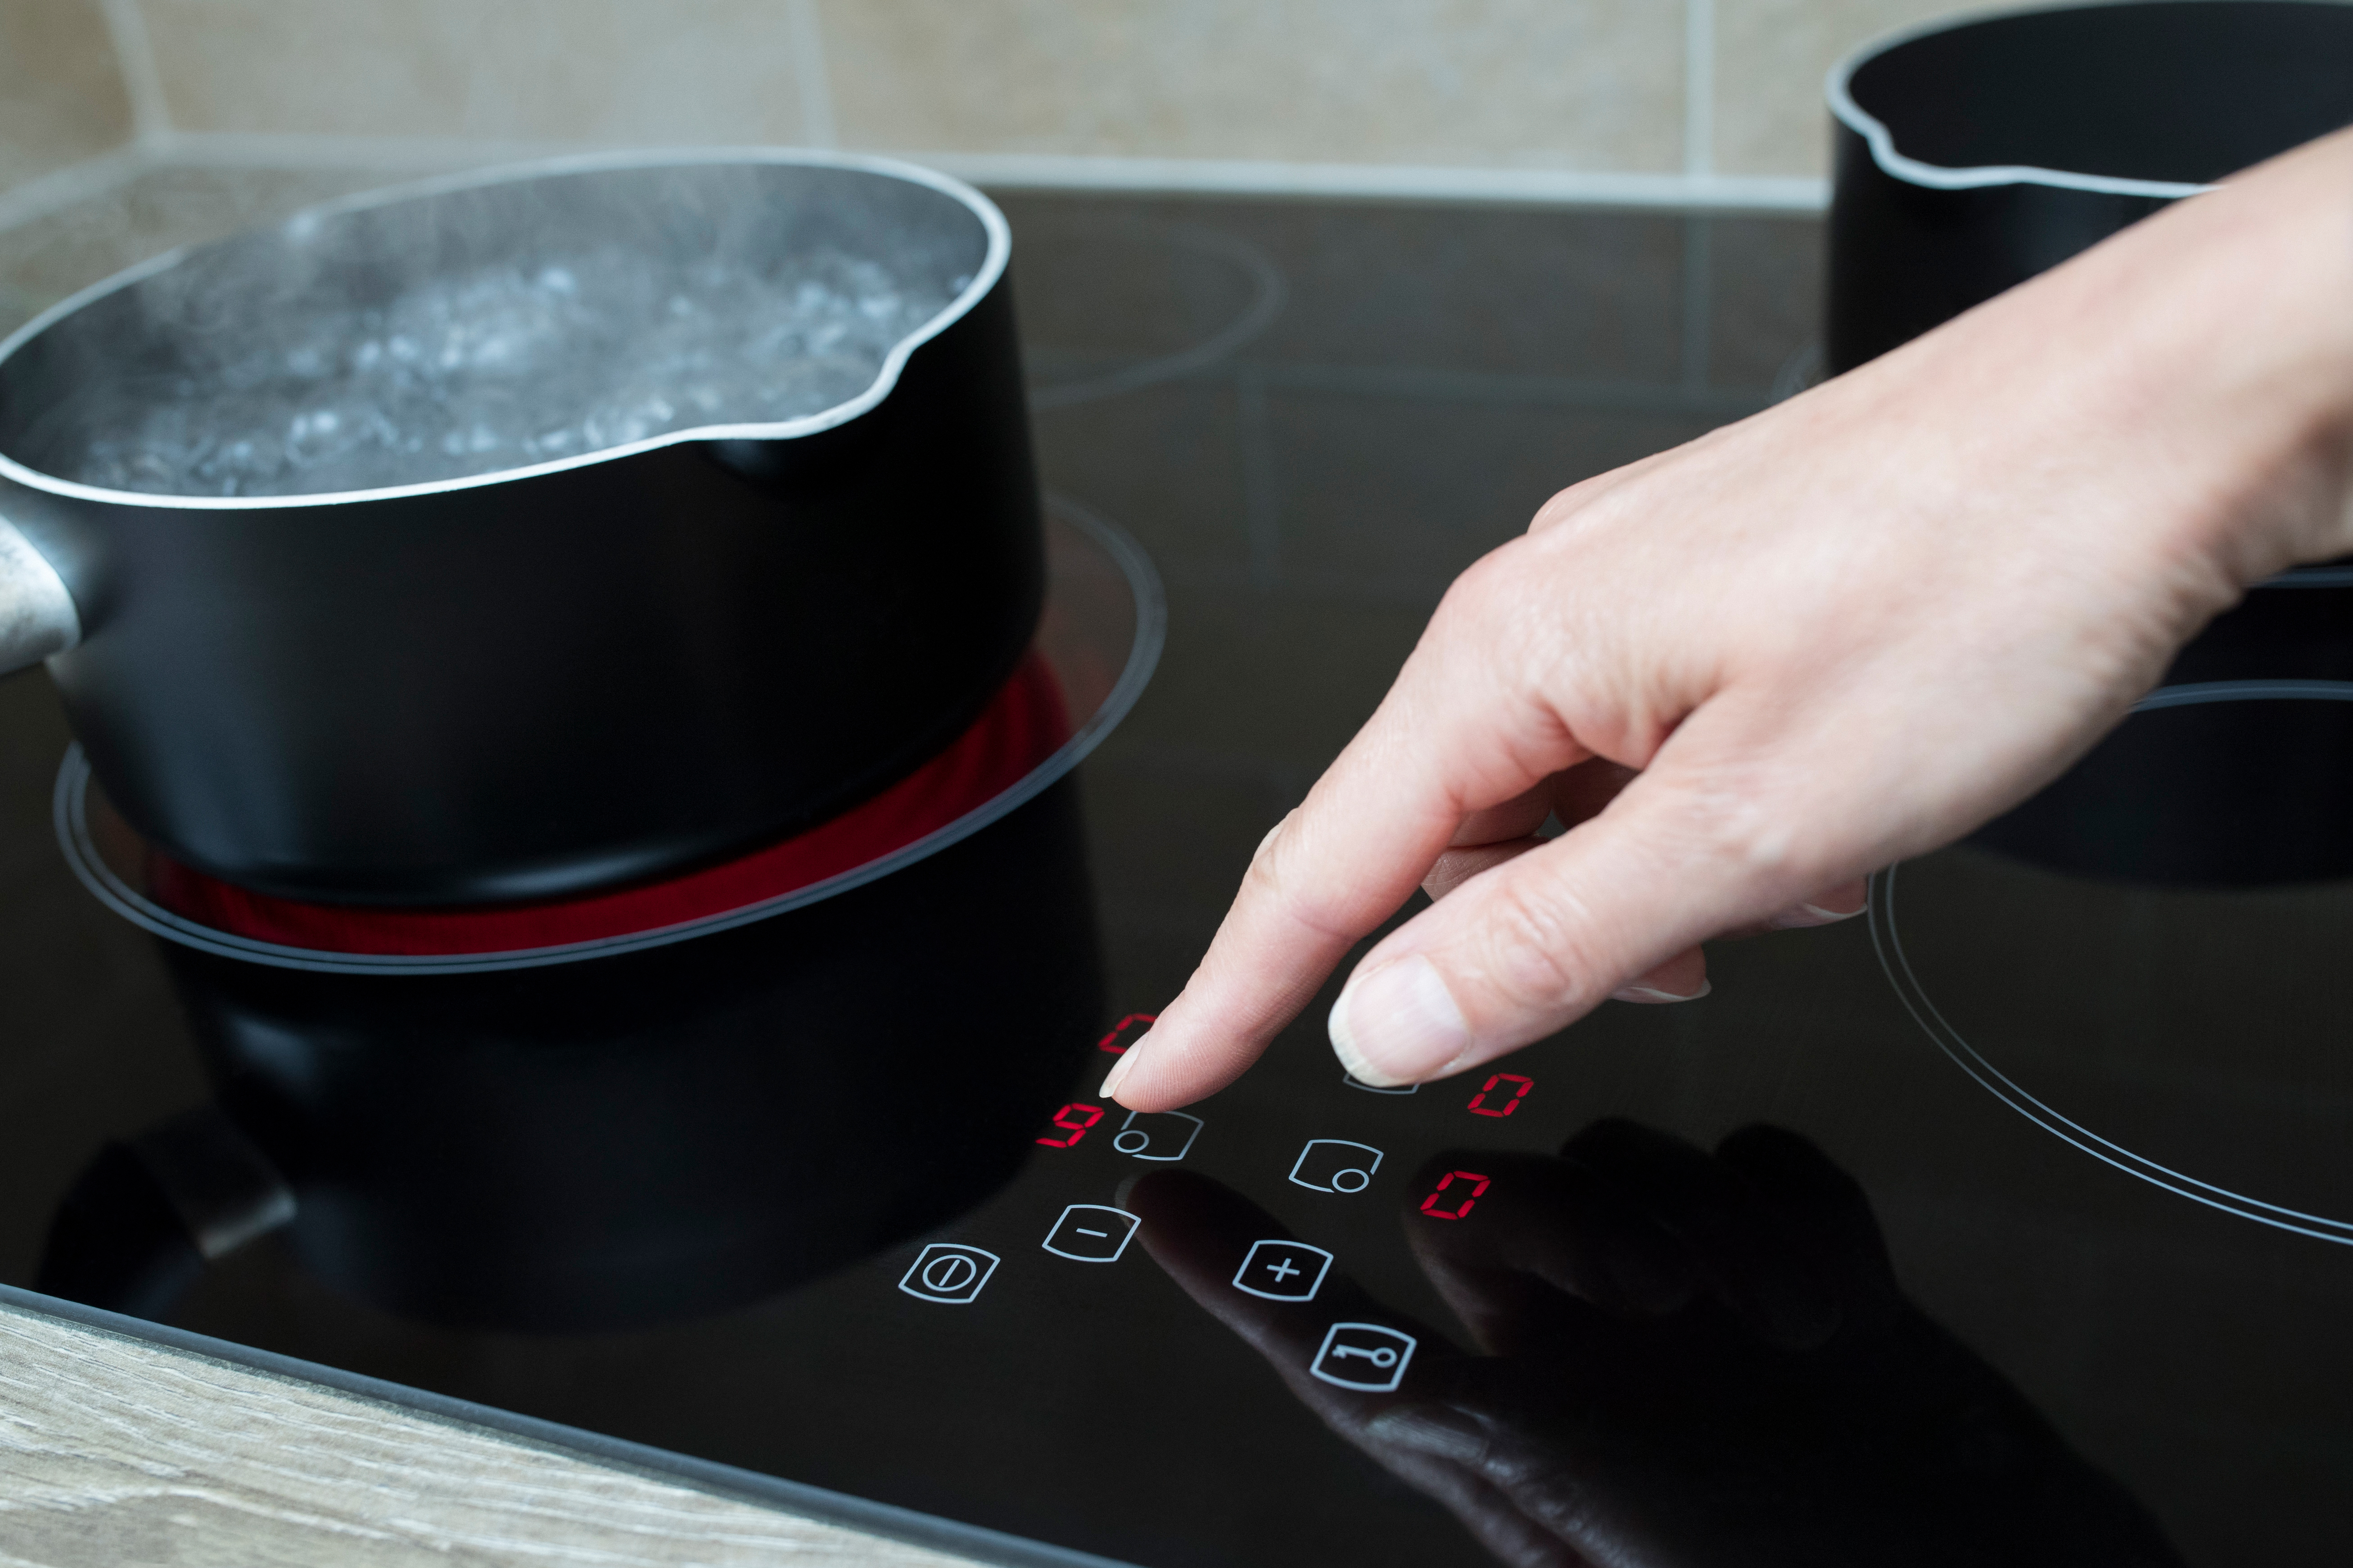 How to Clean a Glass Cooktop